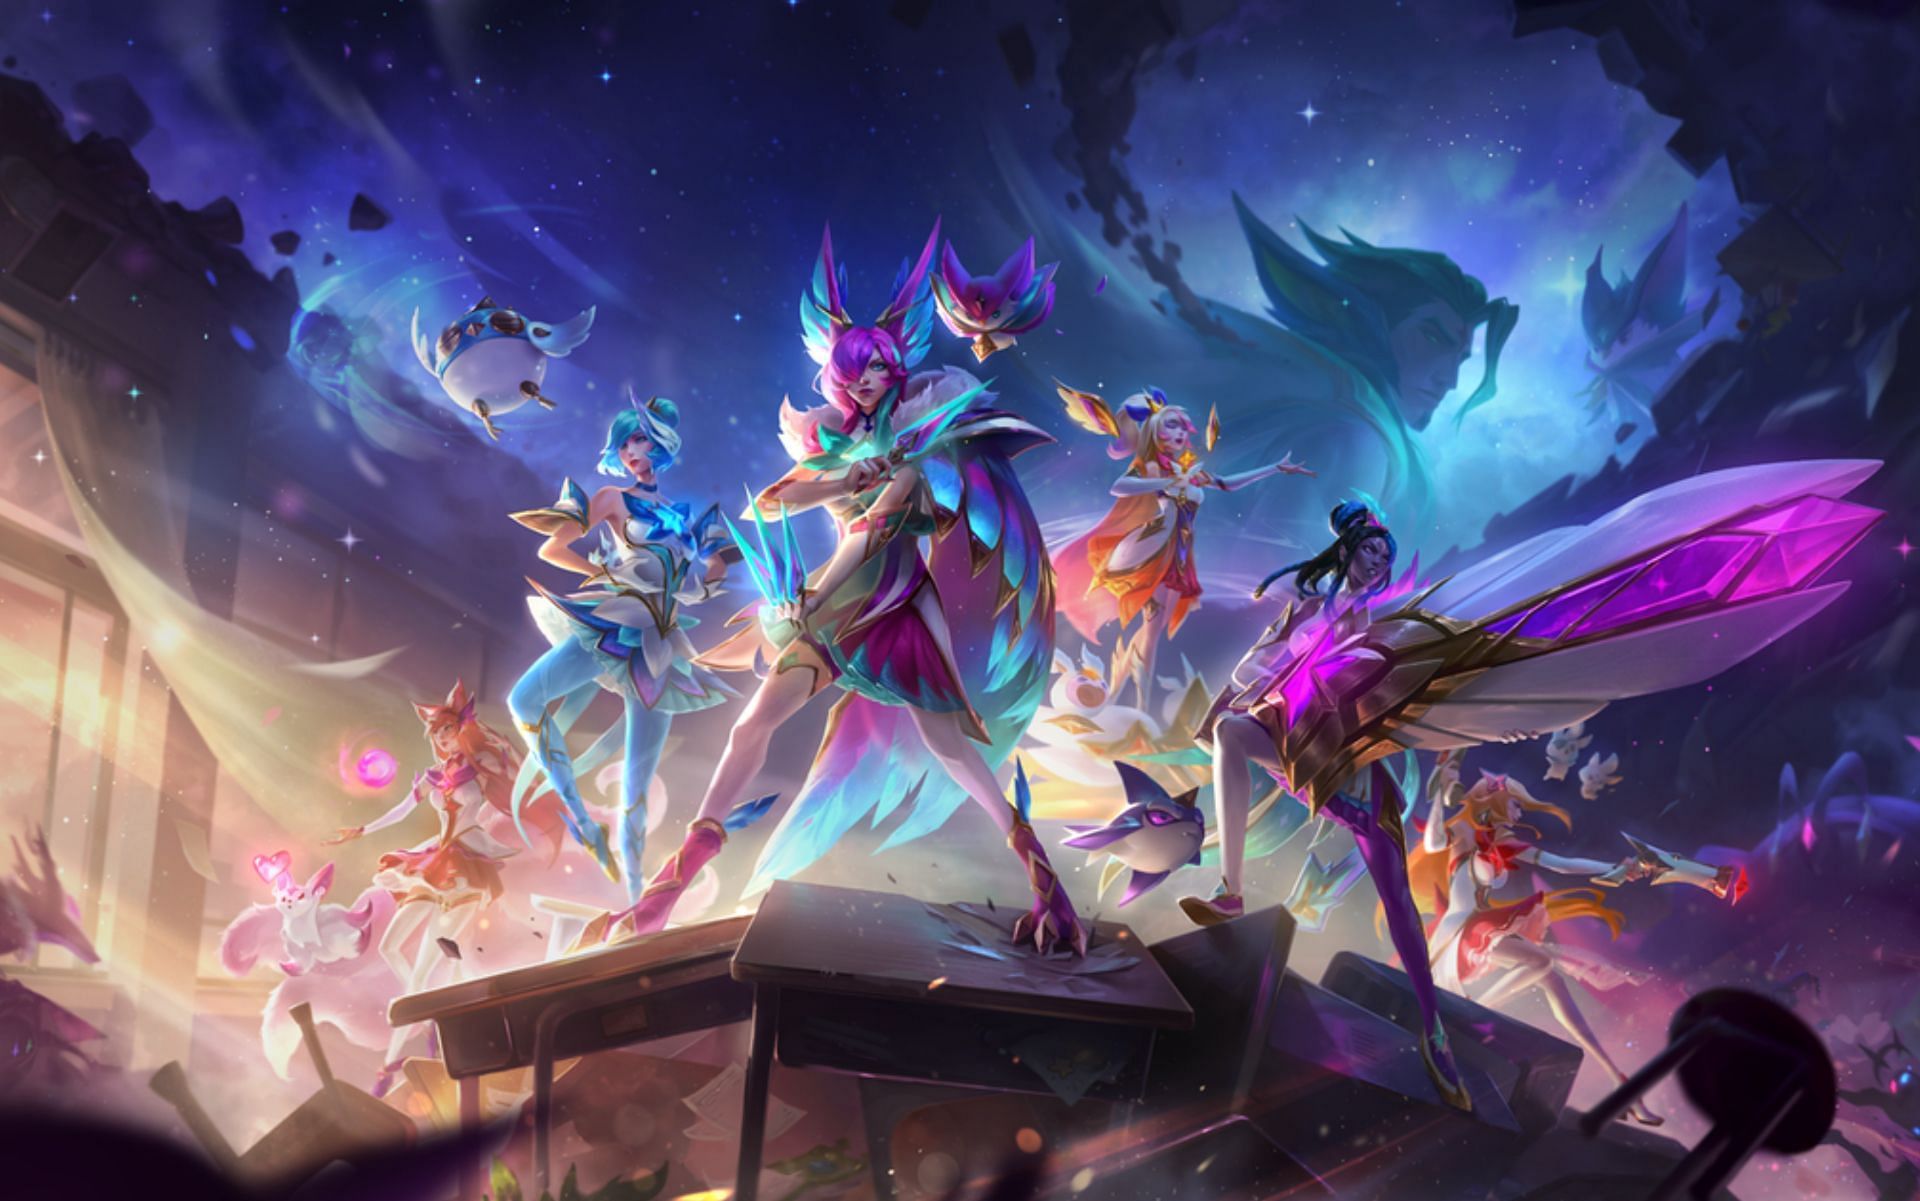 Is League of Legends worth playing in 2023?